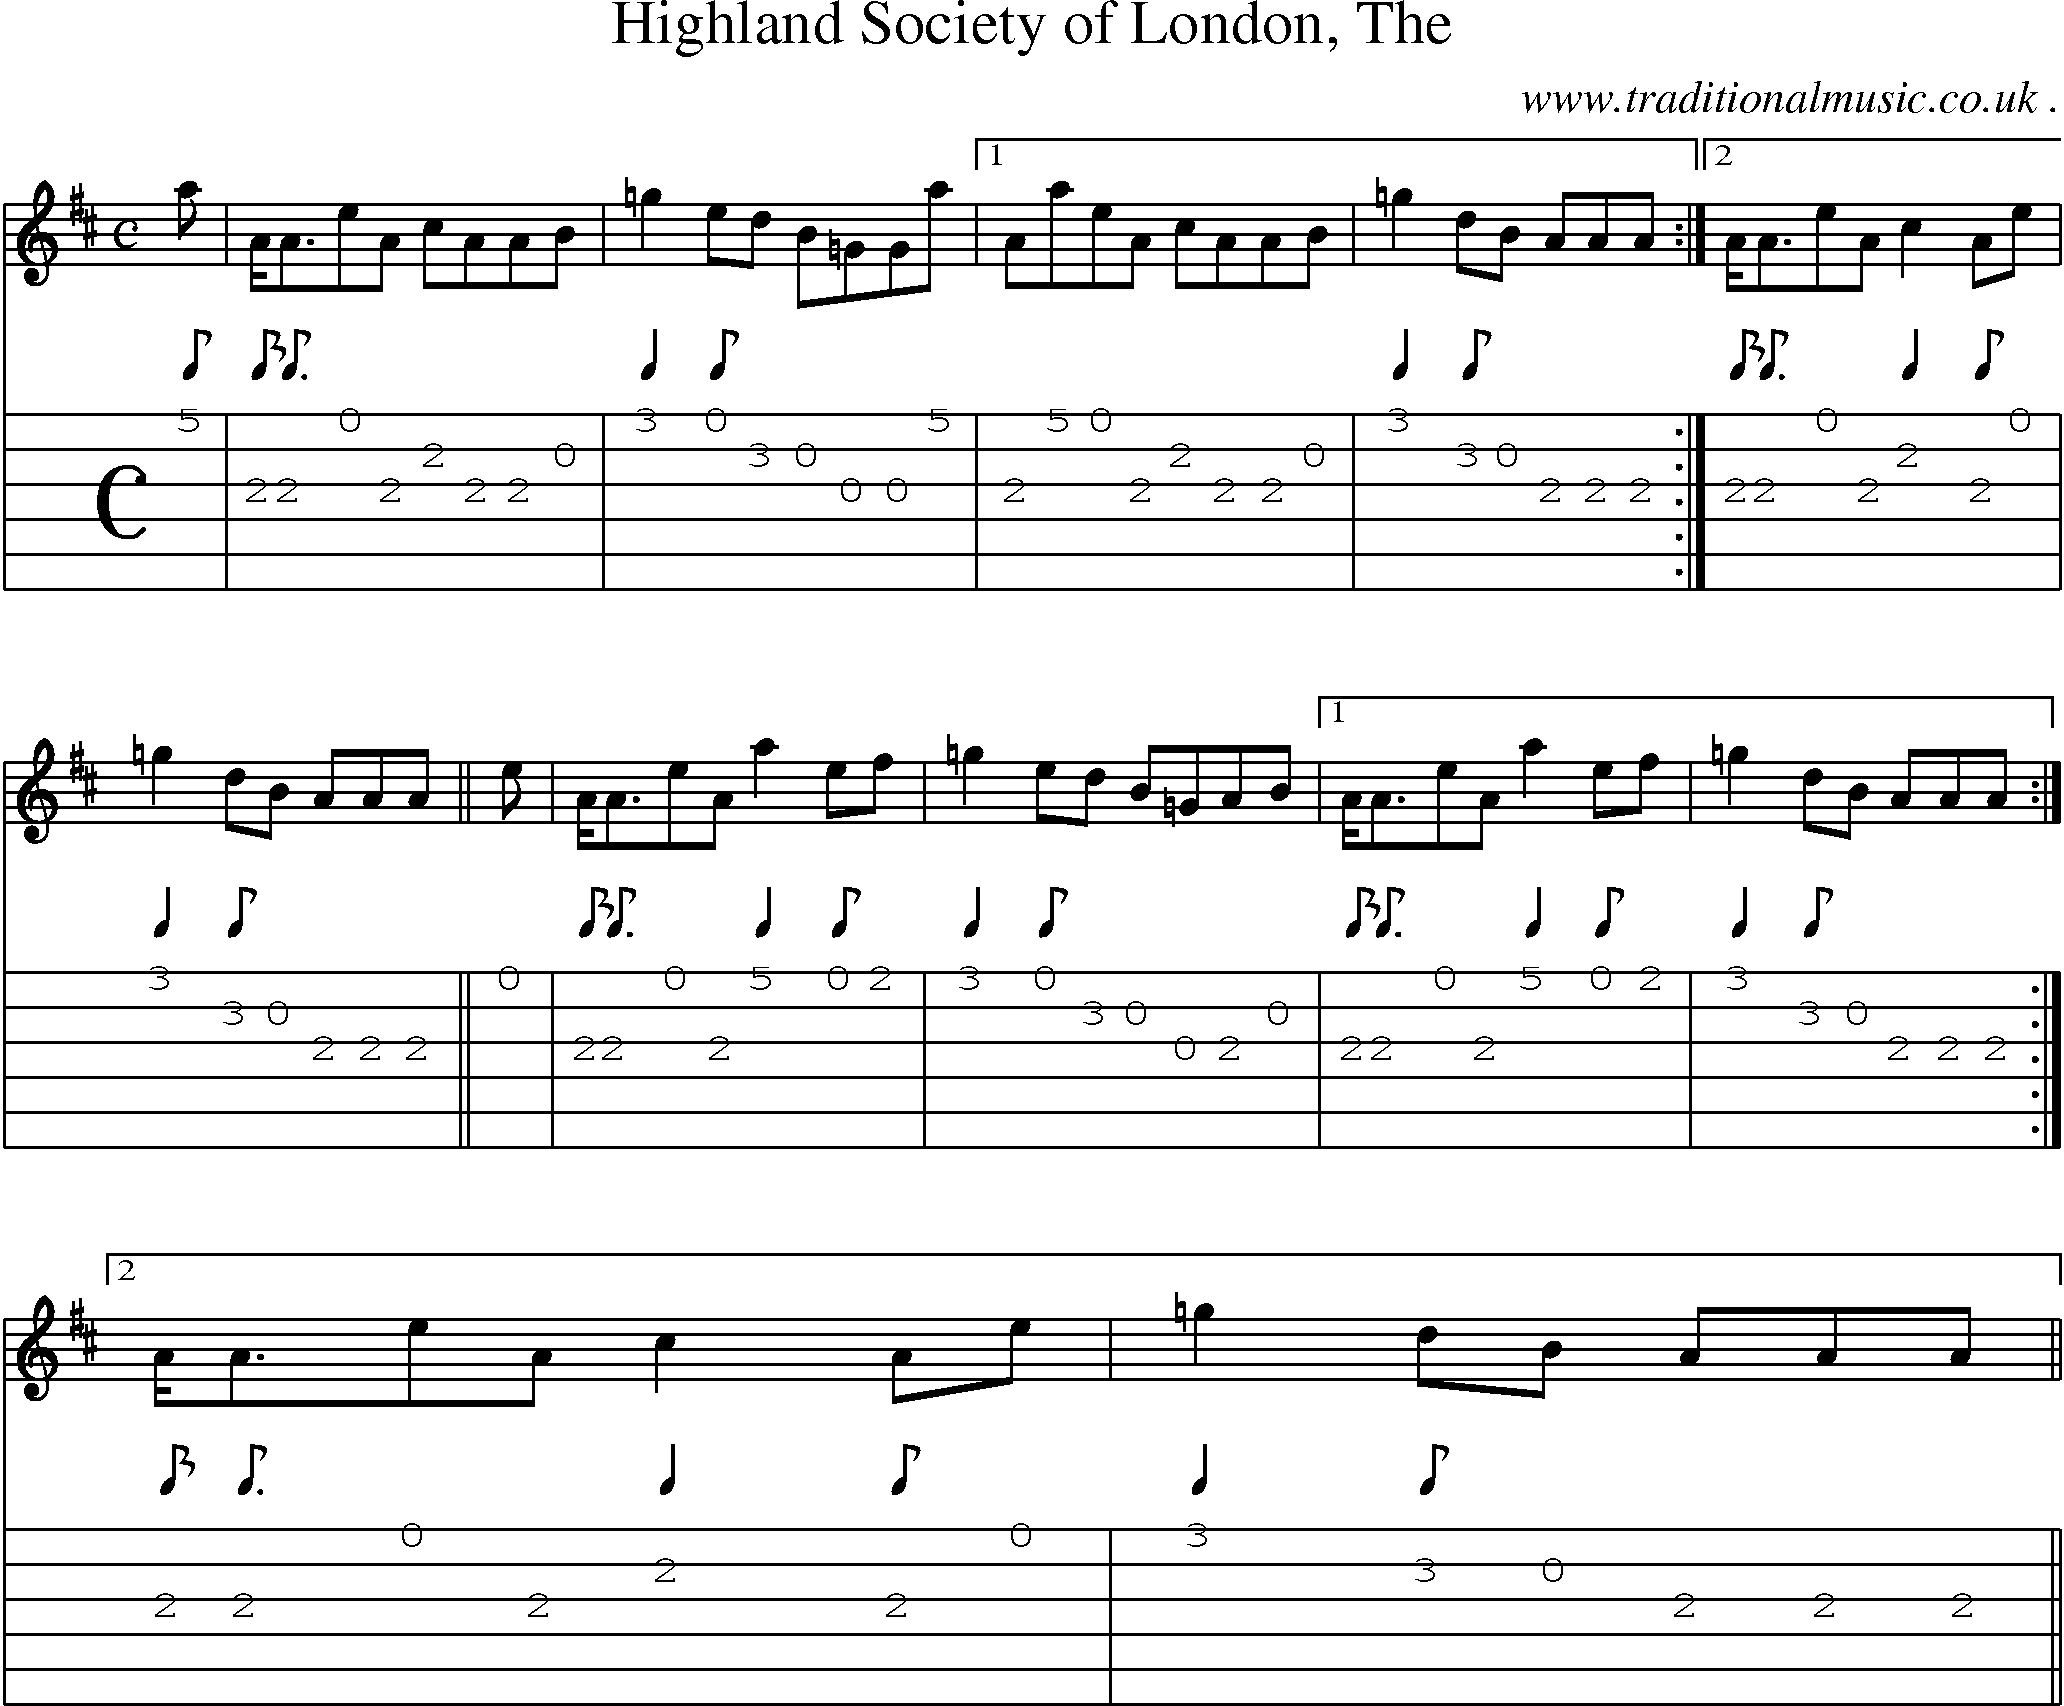 Sheet-music  score, Chords and Guitar Tabs for Highland Society Of London The